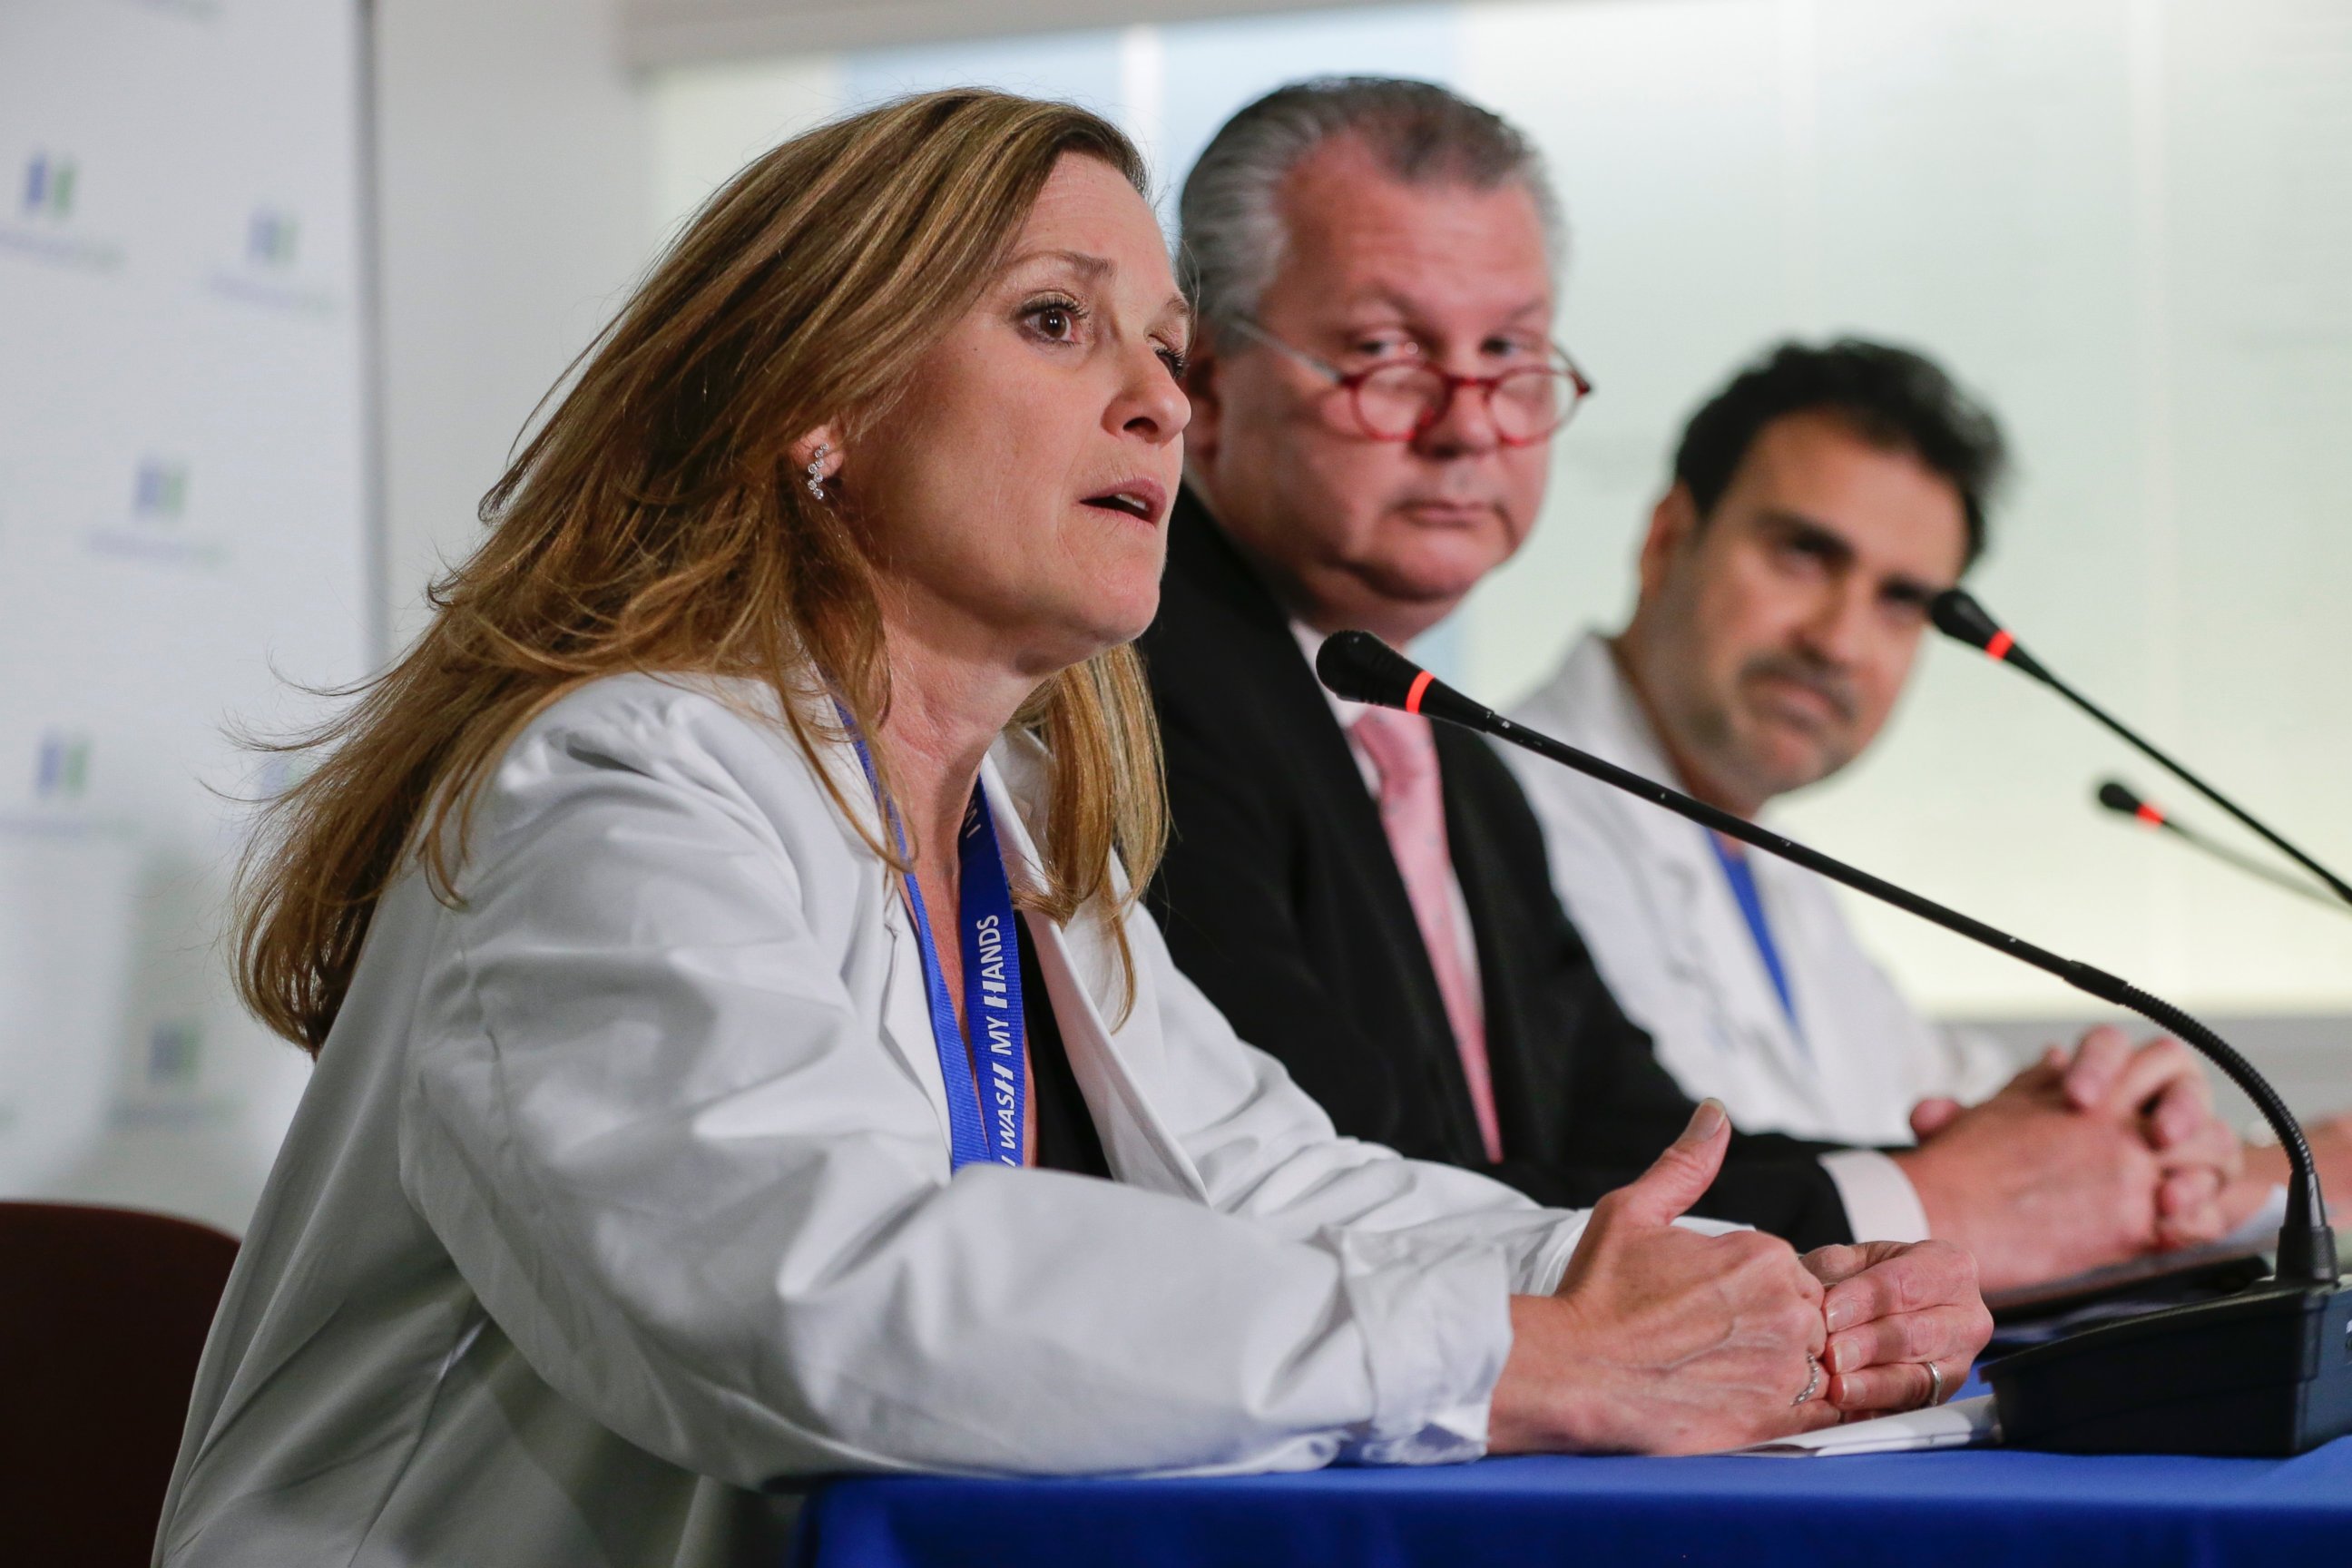 PHOTO: Dr. Ihor Sawczuk, center, and Dr. Abdulla Al-Khan, right, watch as Dr. Julia Piwoz speaks during a news conference at the Hackensack University Medical Center, June 1, 2016, in Hackensack, N.J.